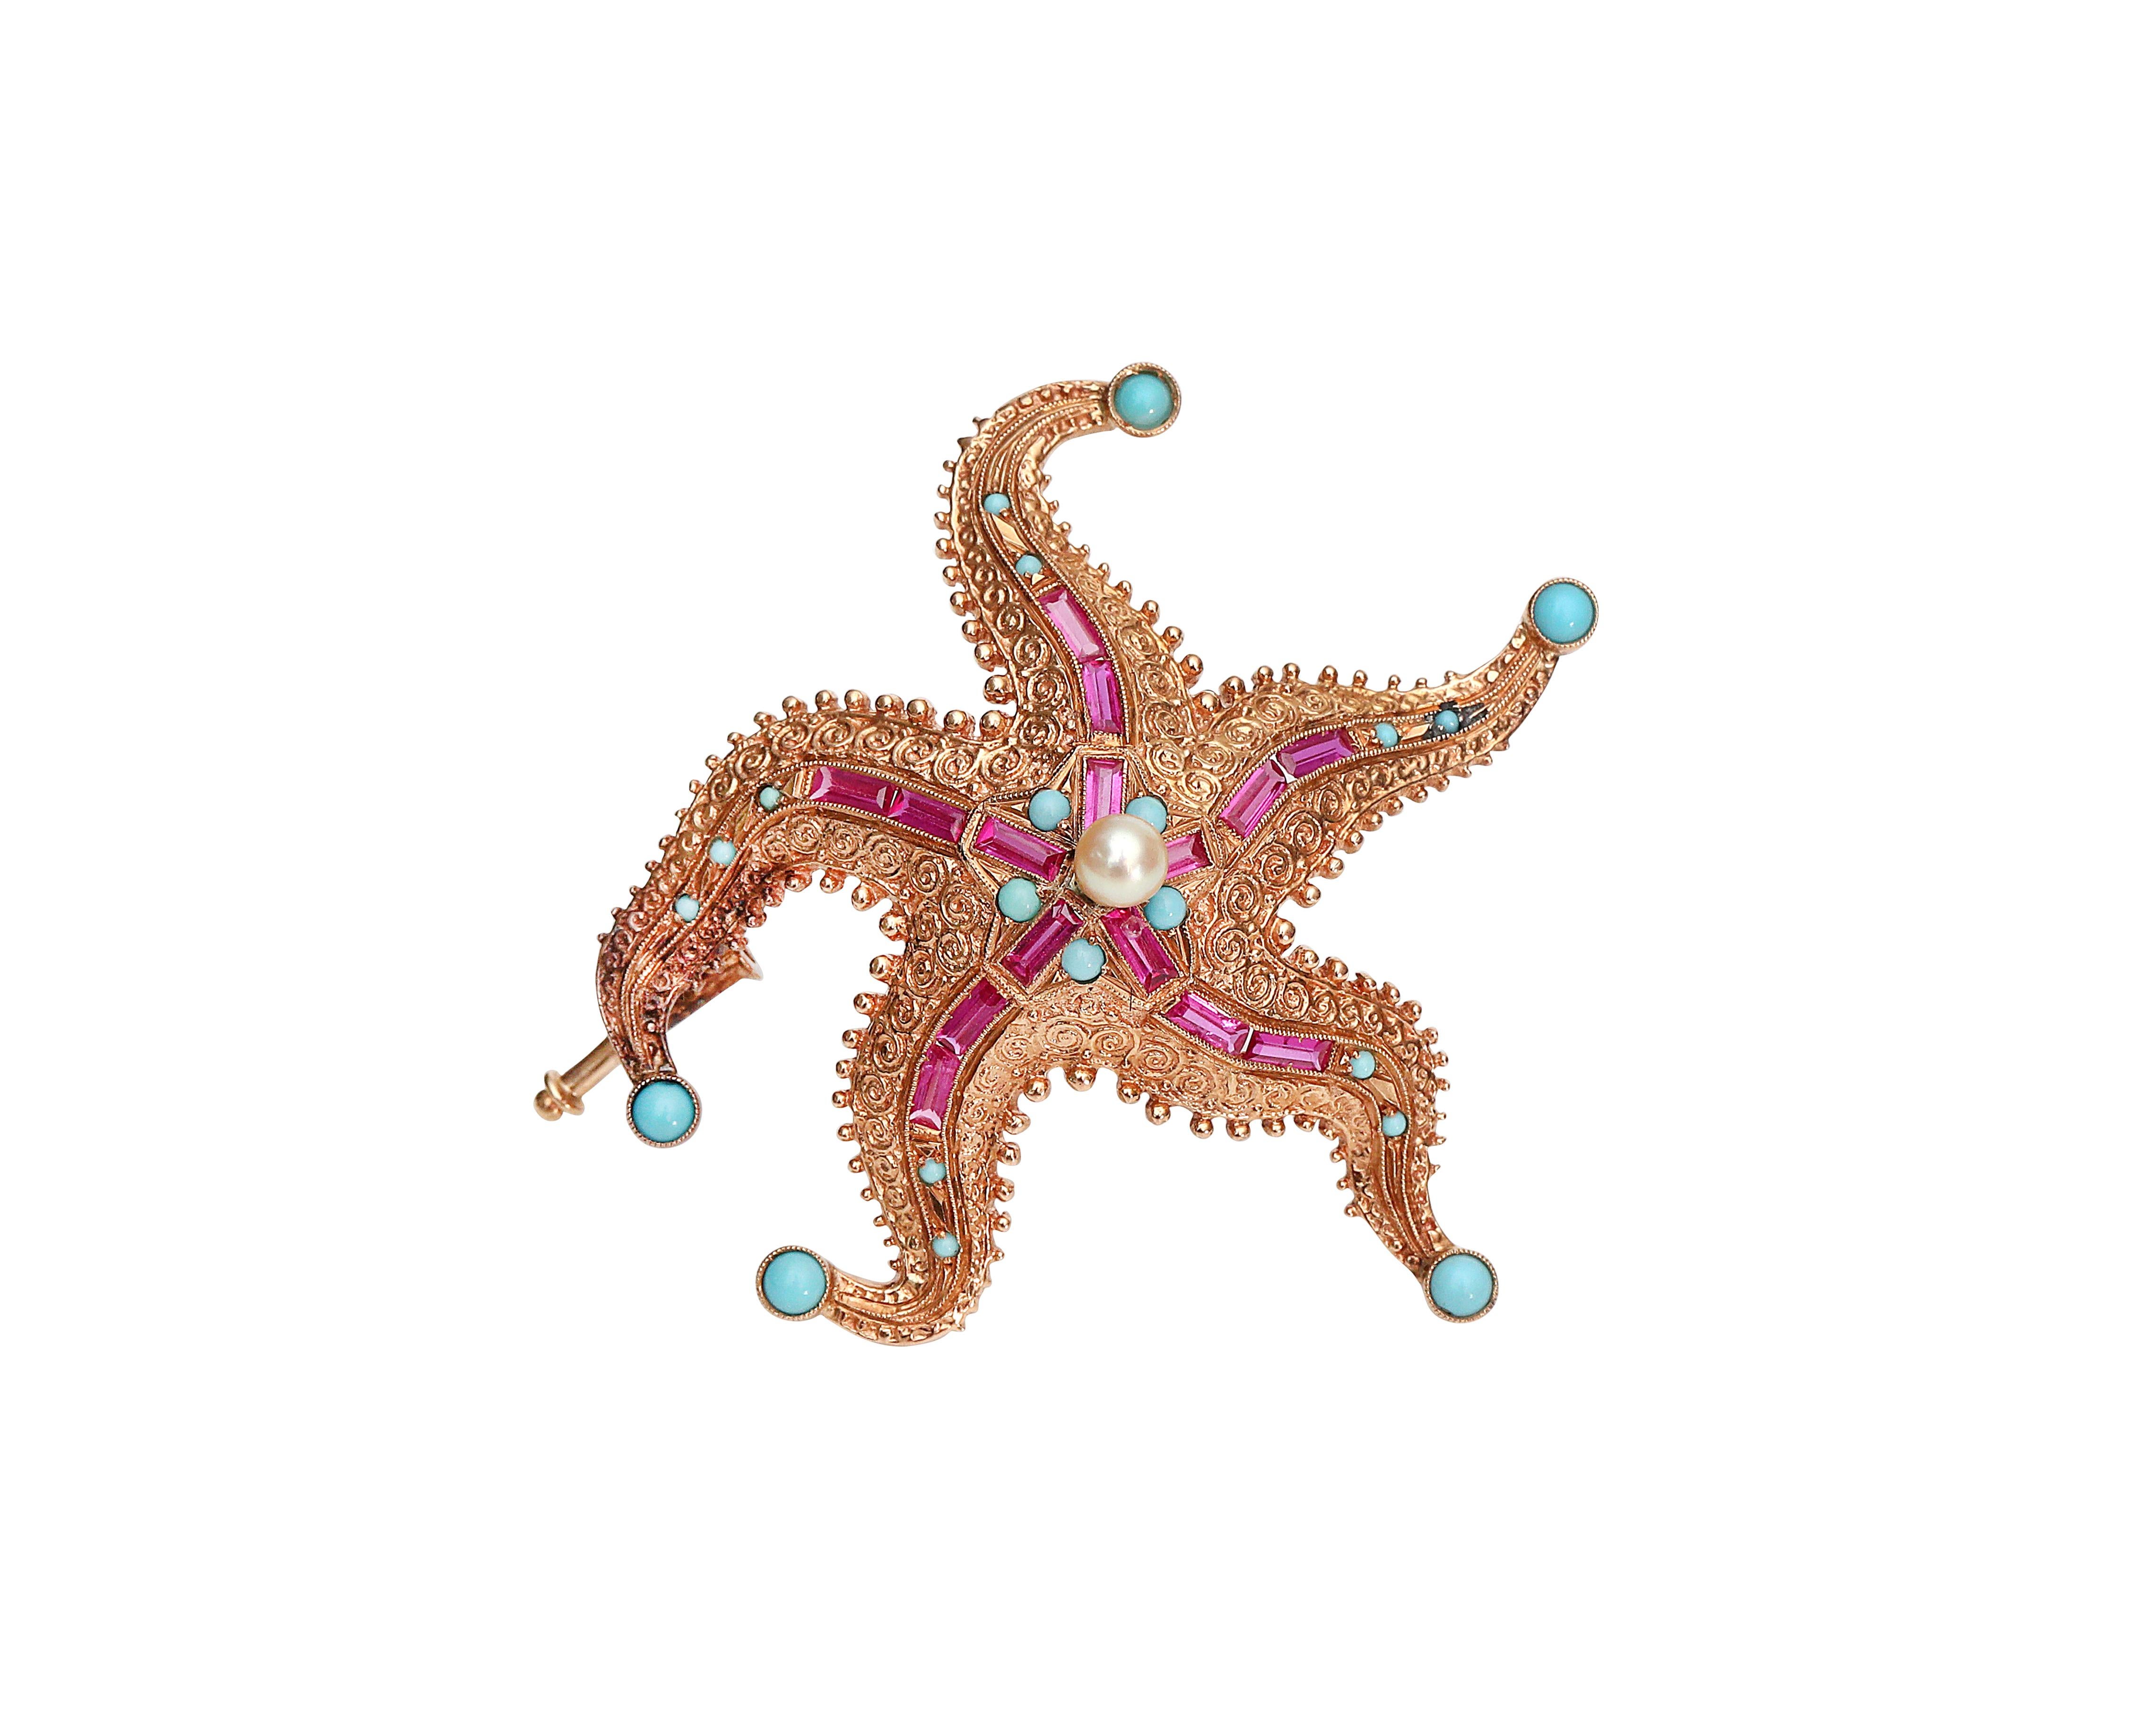 Take a reminder of the beach and sunny days everywhere you go with this 18K yellow gold Starfish Brooch. The bright ruby and pearl accents complement the buttery yellow gold beautifully. This would make a great addition to any vintage lover's